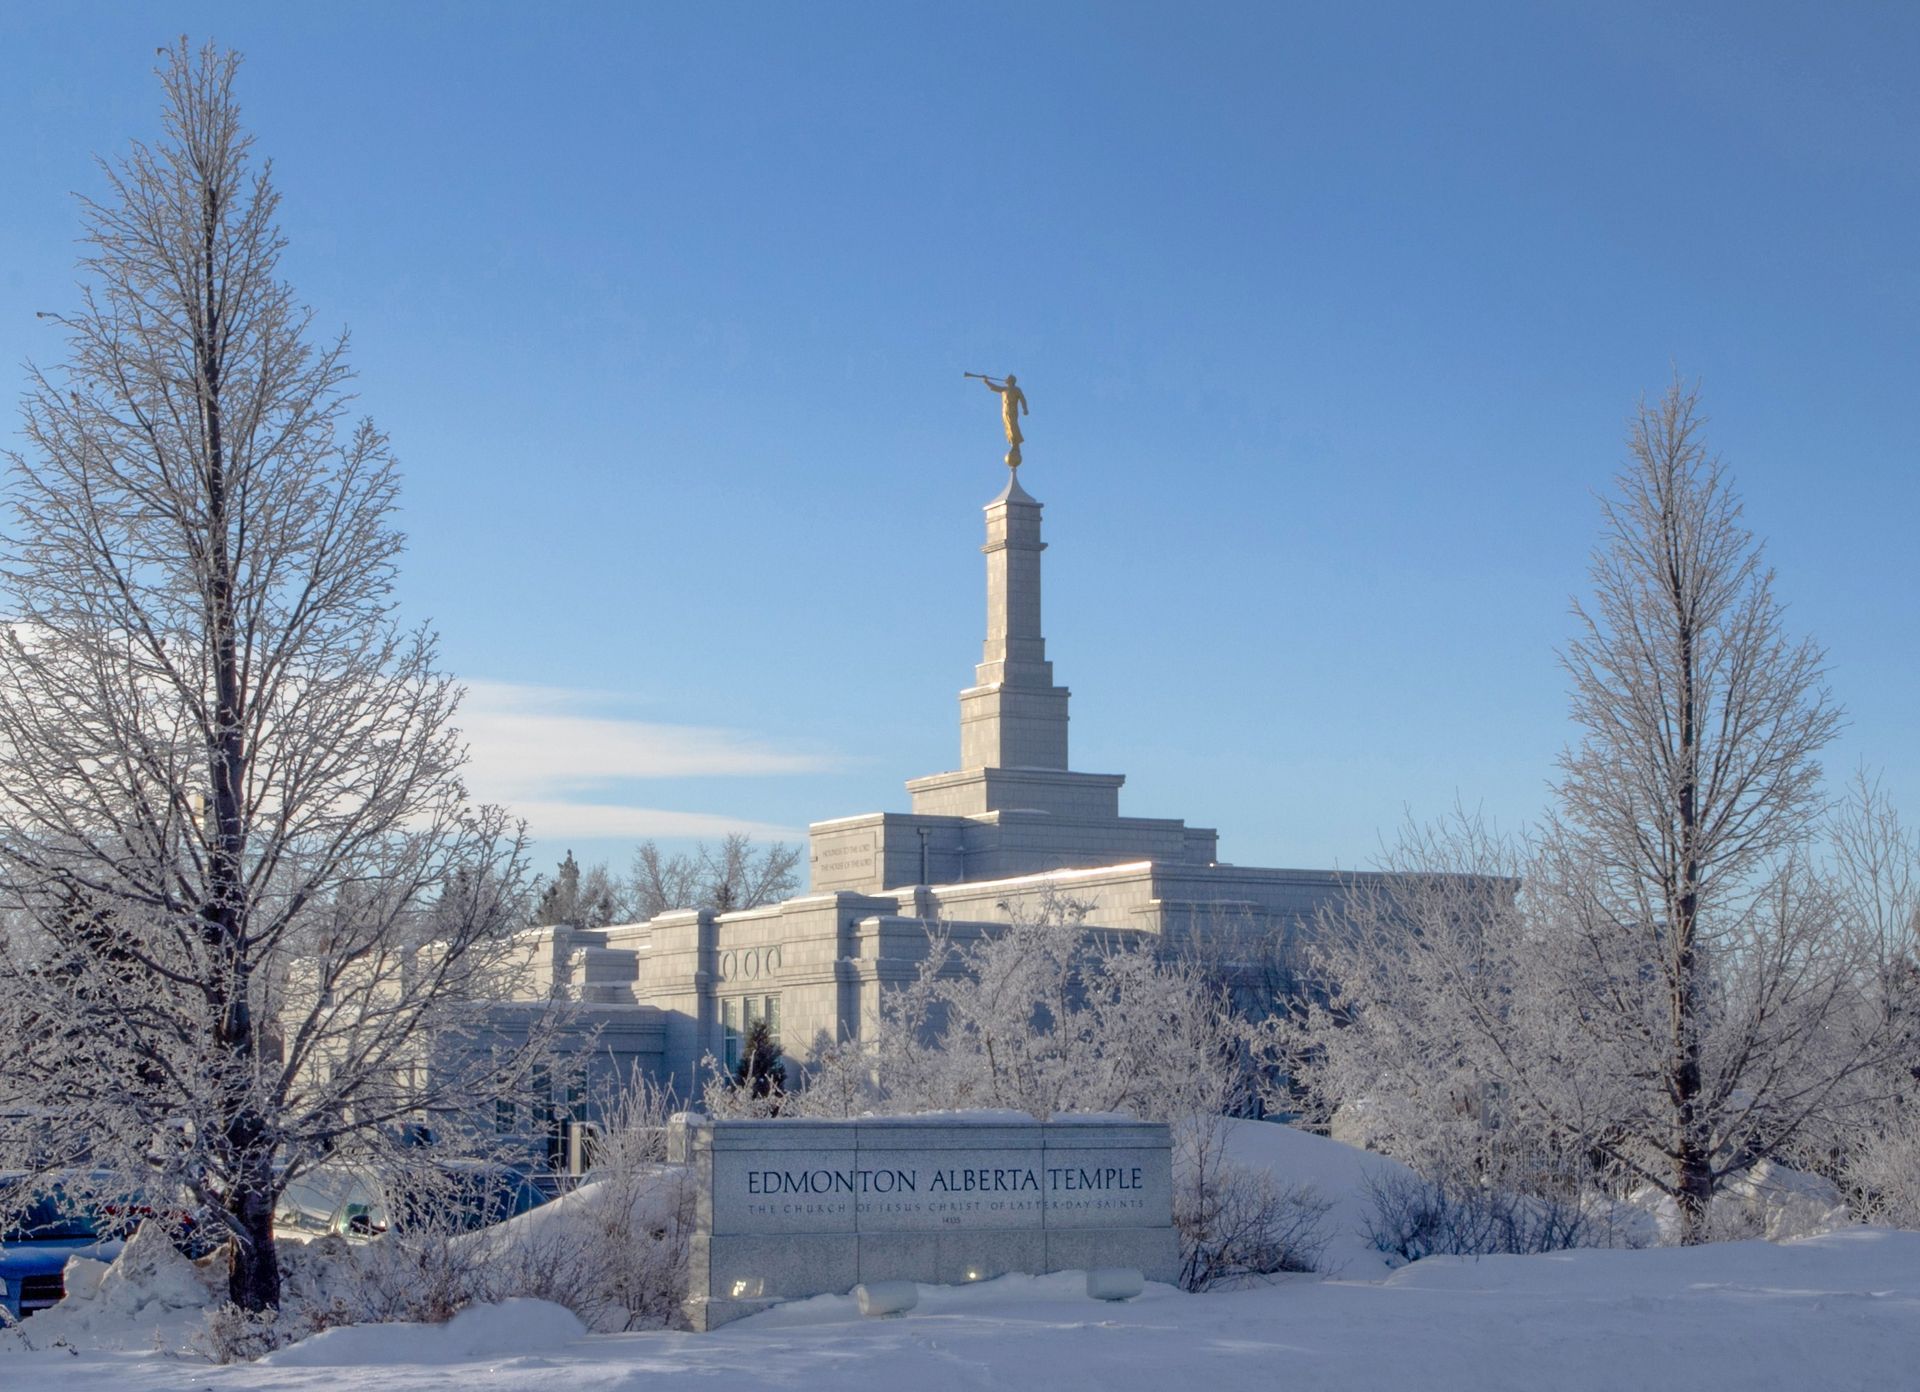 Snow covers the grounds of the Edmonton Alberta Temple in the winter.